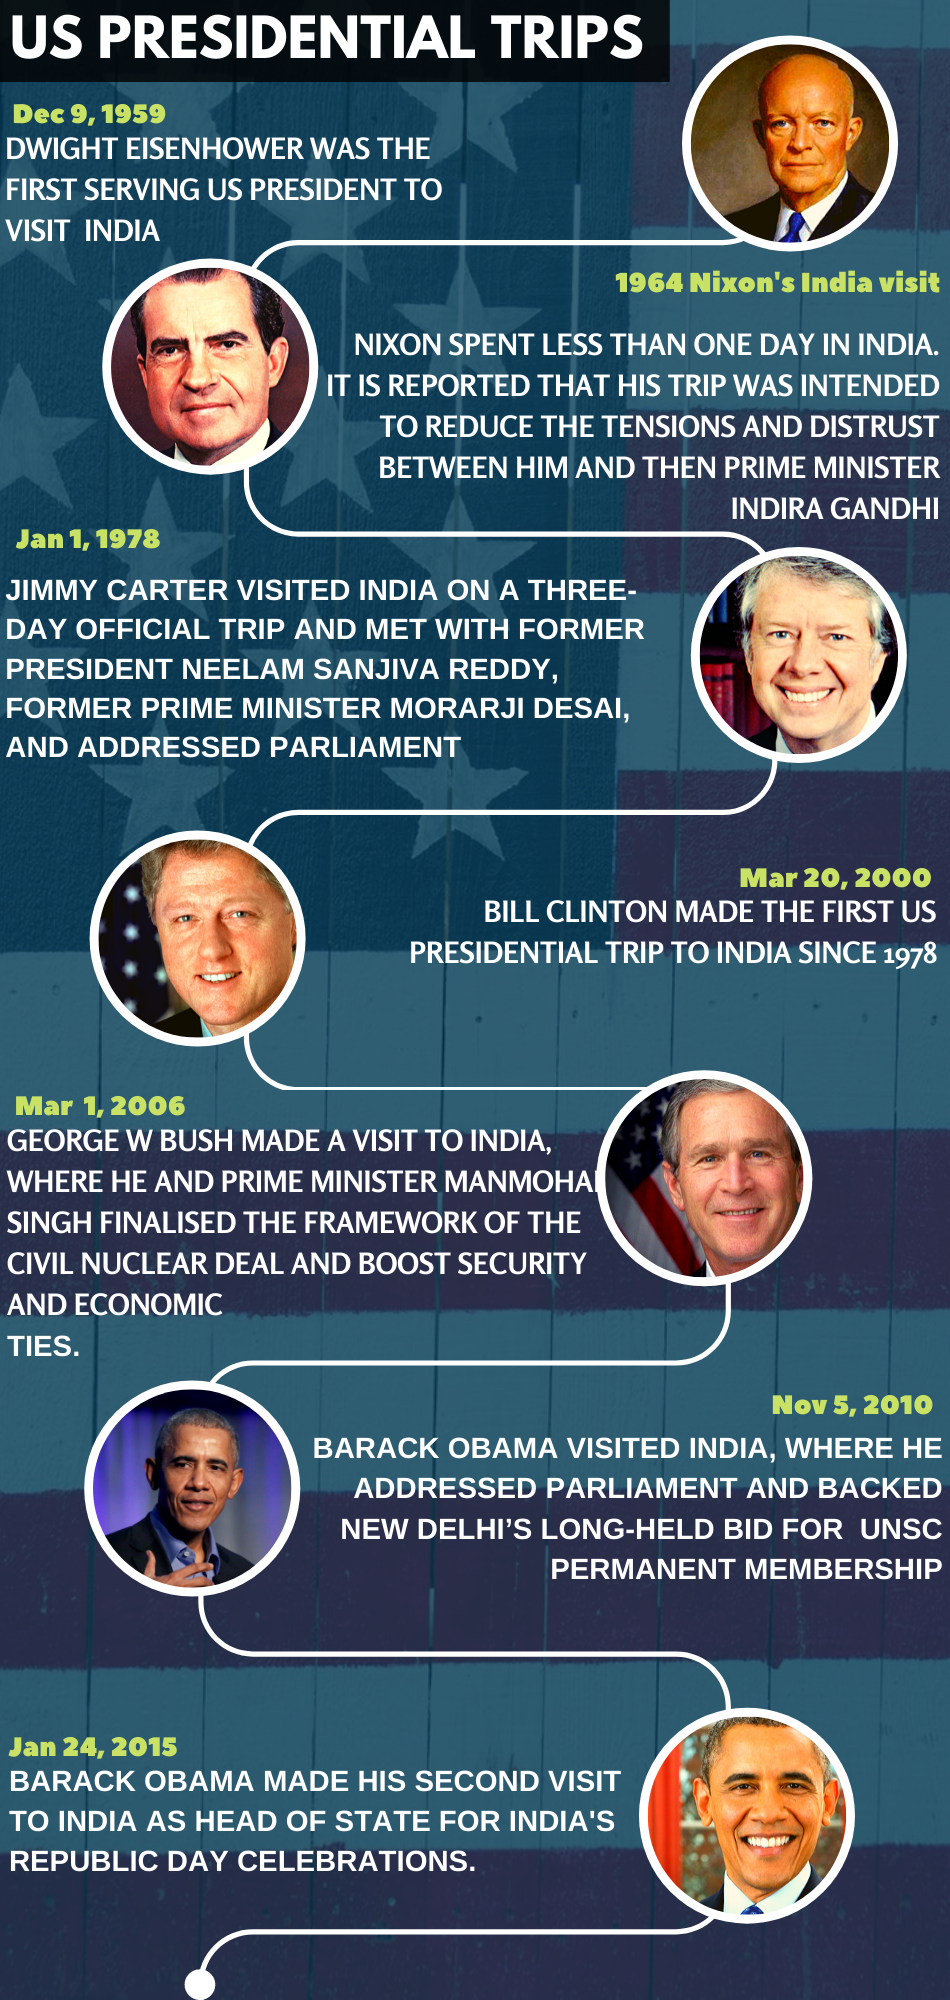 US presidential trips to India.